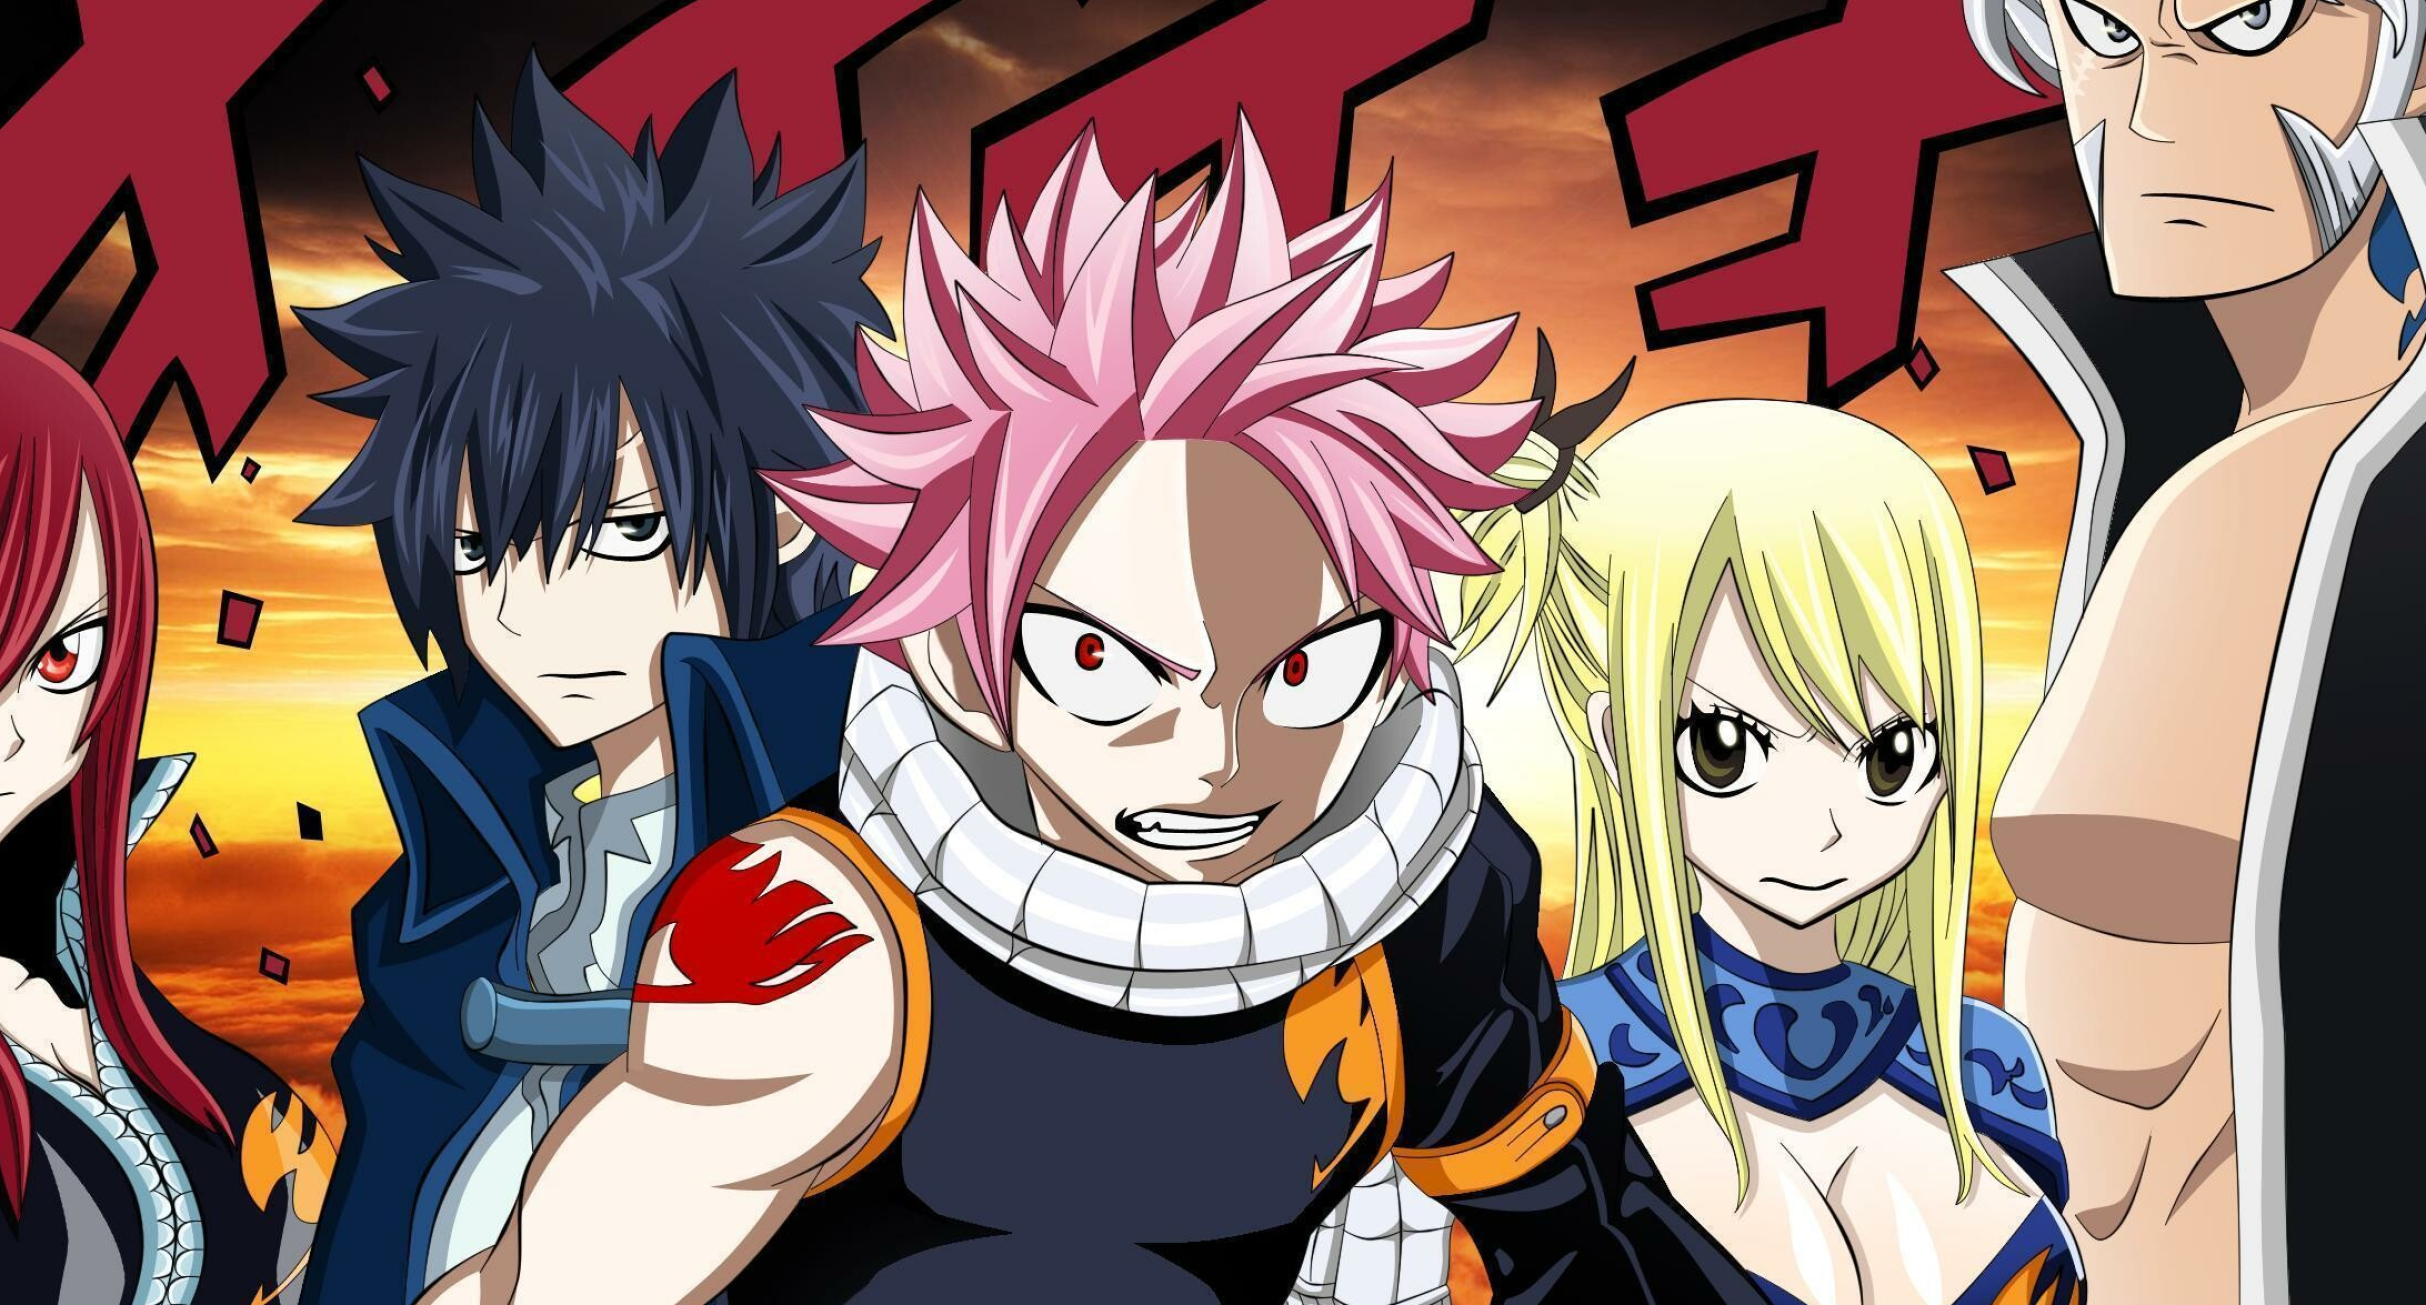 Fairy Tail: The sequel premiered on TV Tokyo on April 5, Anime. 2430x1310 HD Wallpaper.